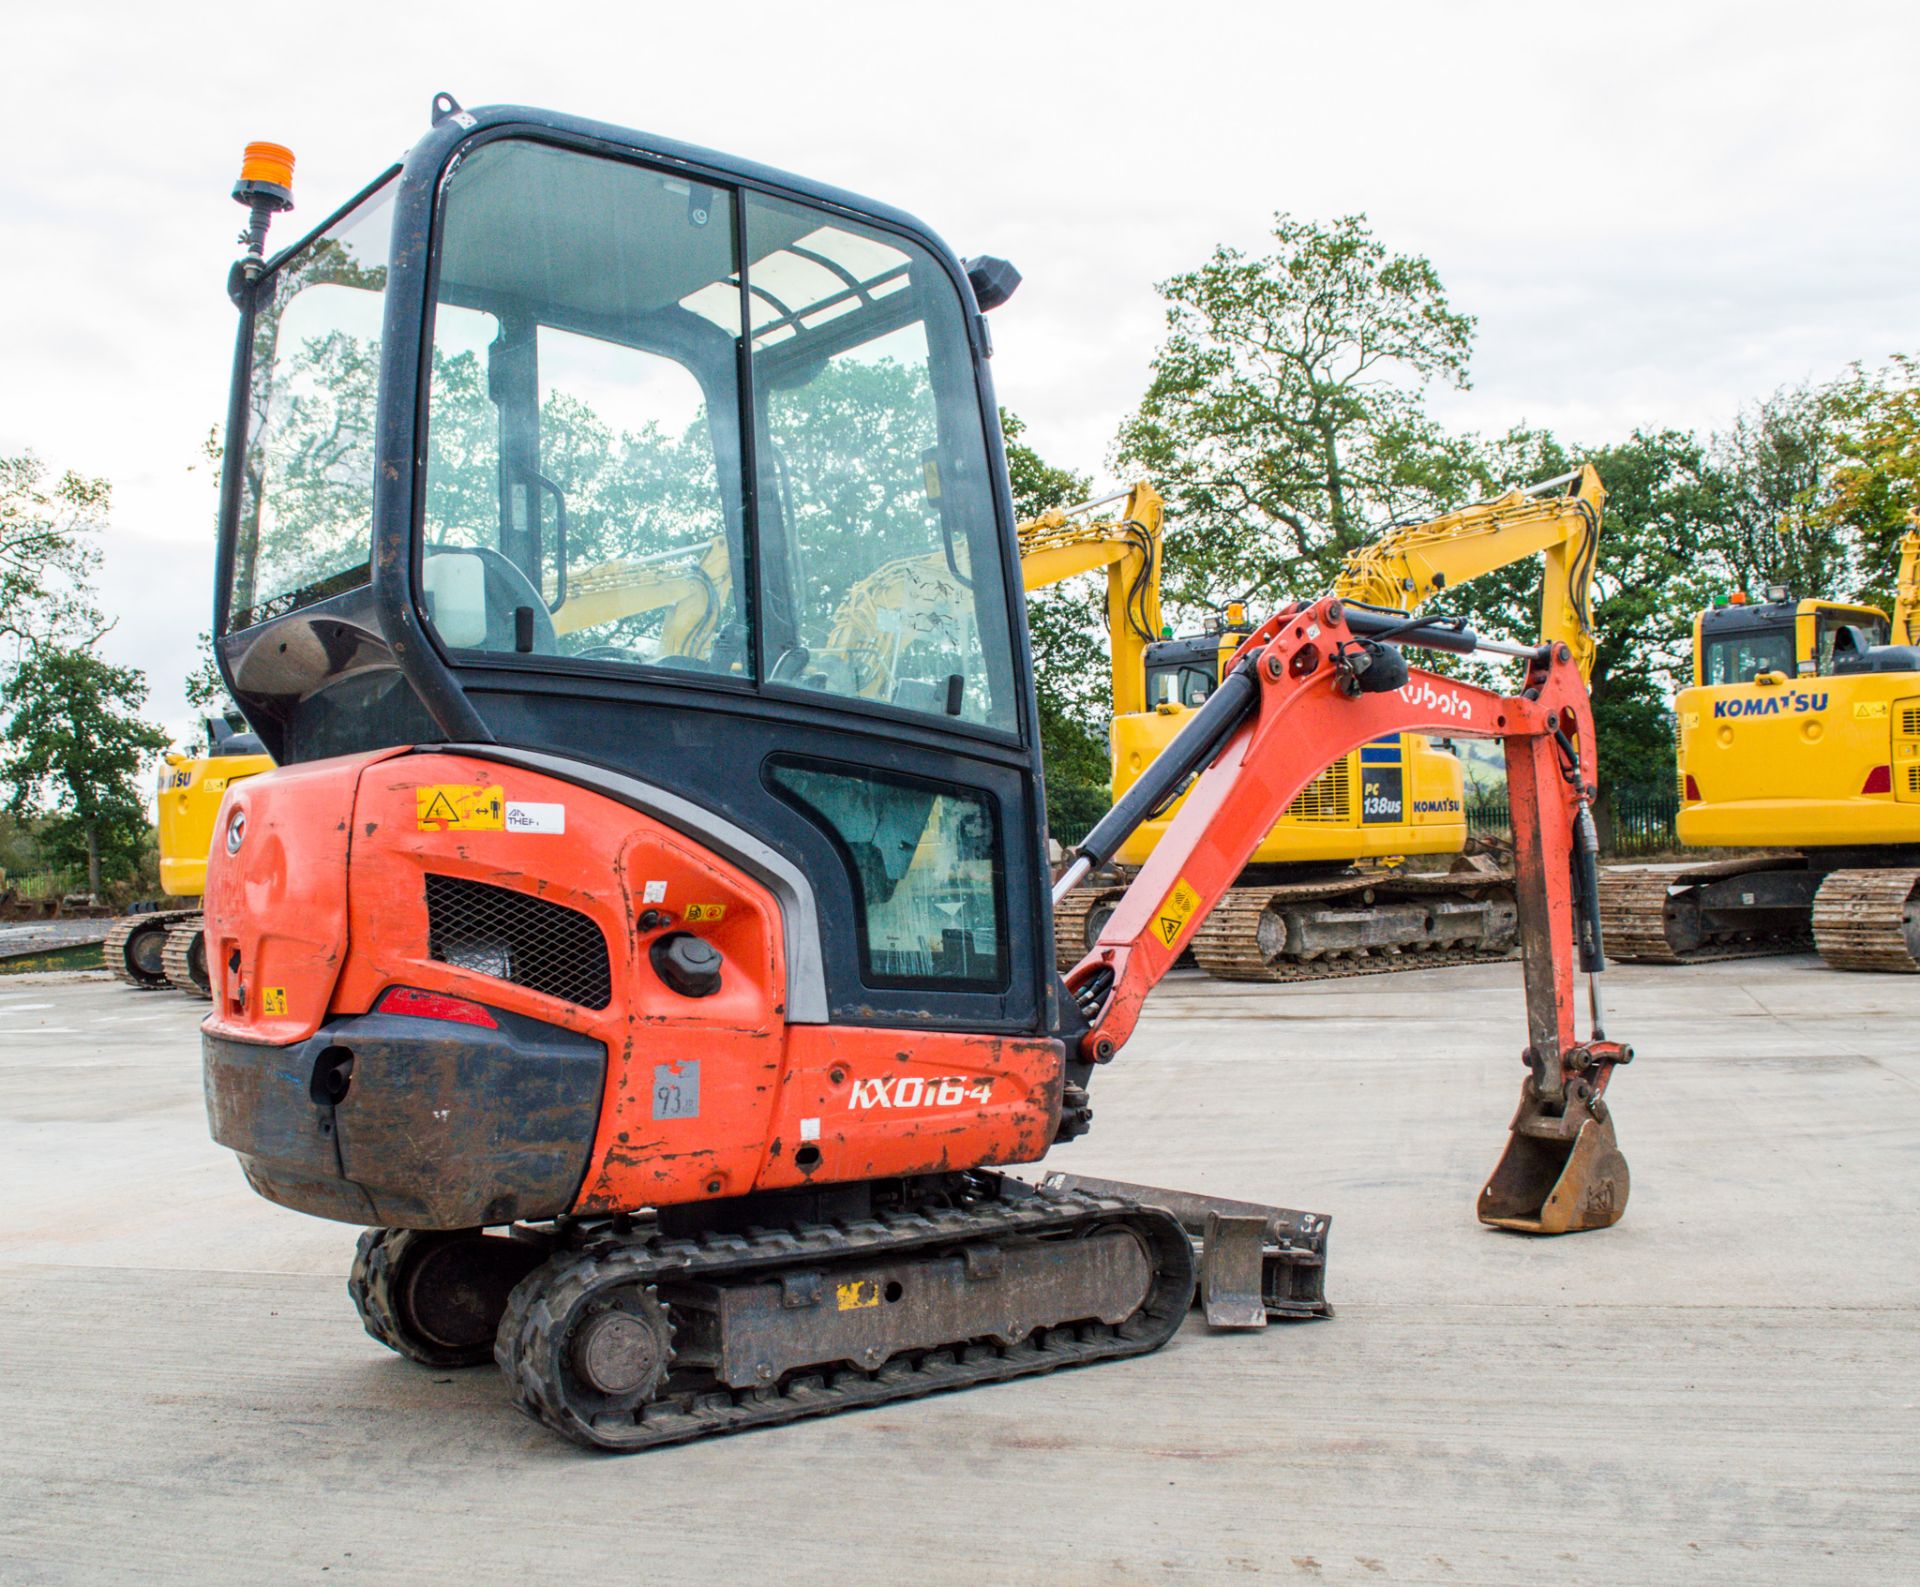 Kubota KX016-4 1.6 tonne rubber tracked excavator Year: 2013 S/N: 56652 Recorded Hours: 3393 c/w - Image 3 of 16